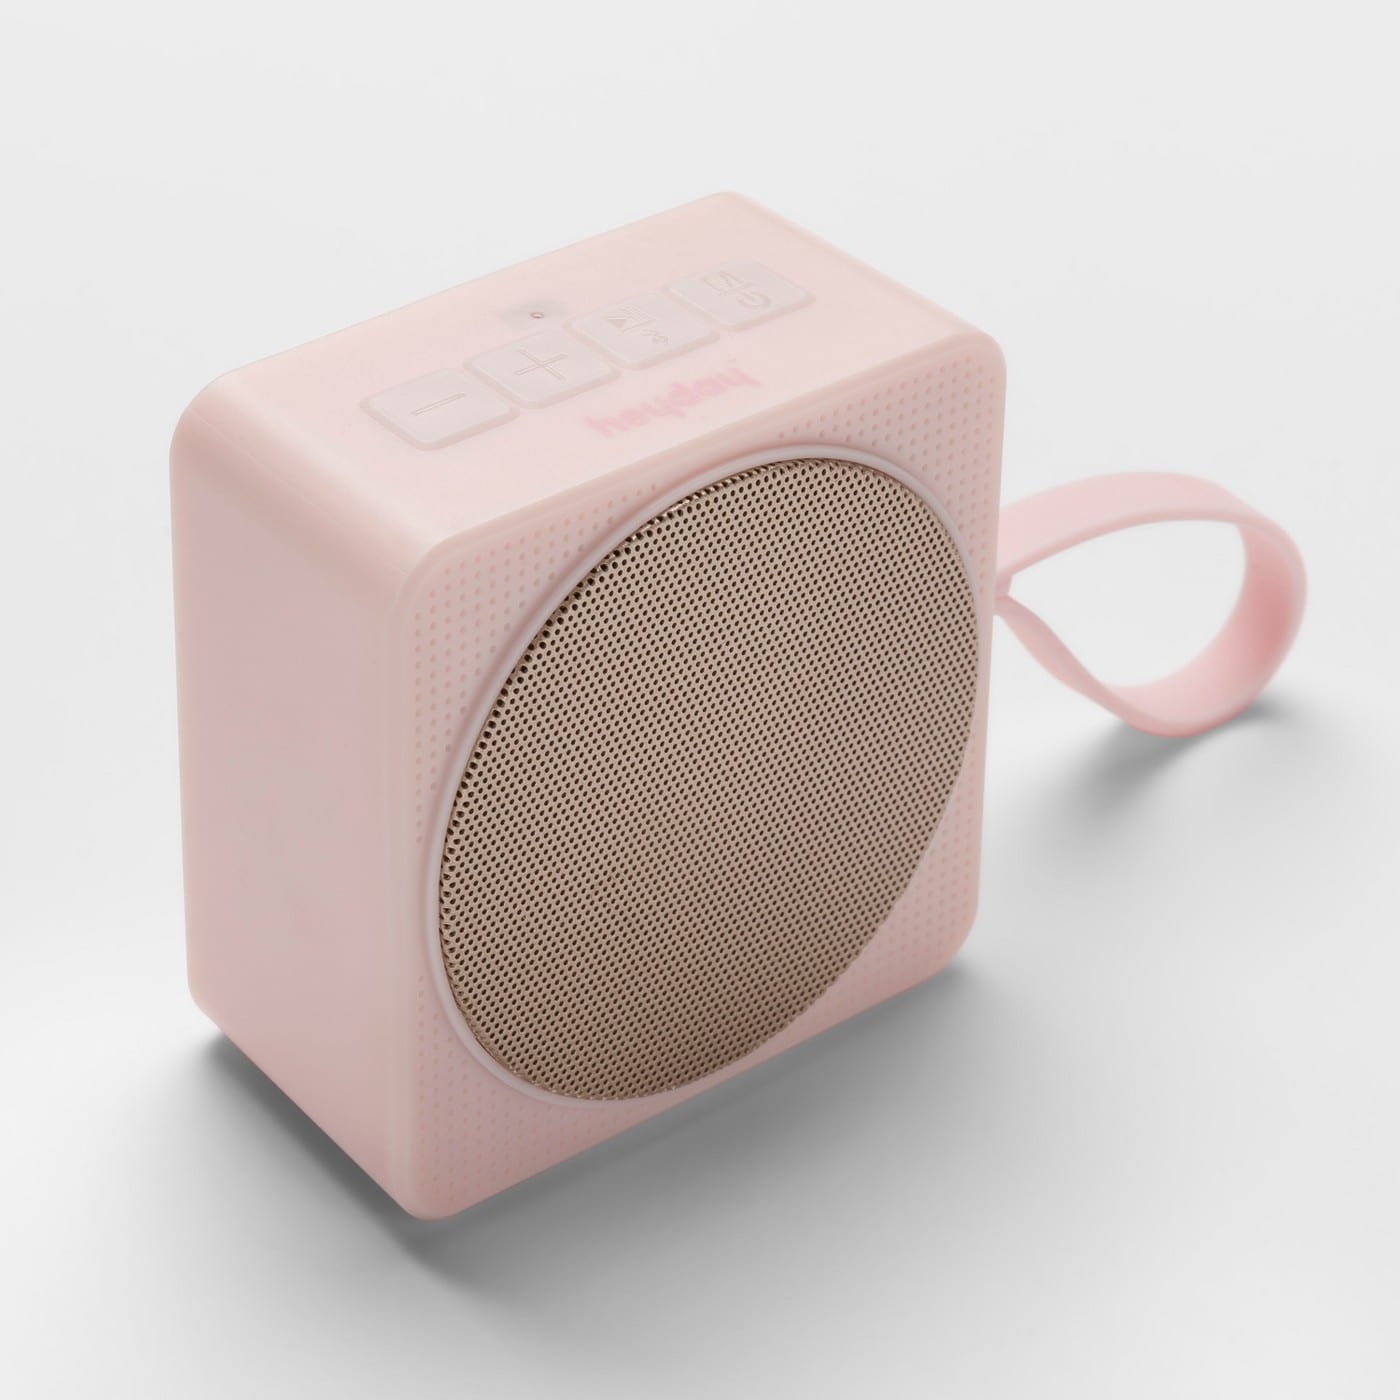 Best Heyday from Target 2018: Pink Gold Portable Bluetooth Speaker